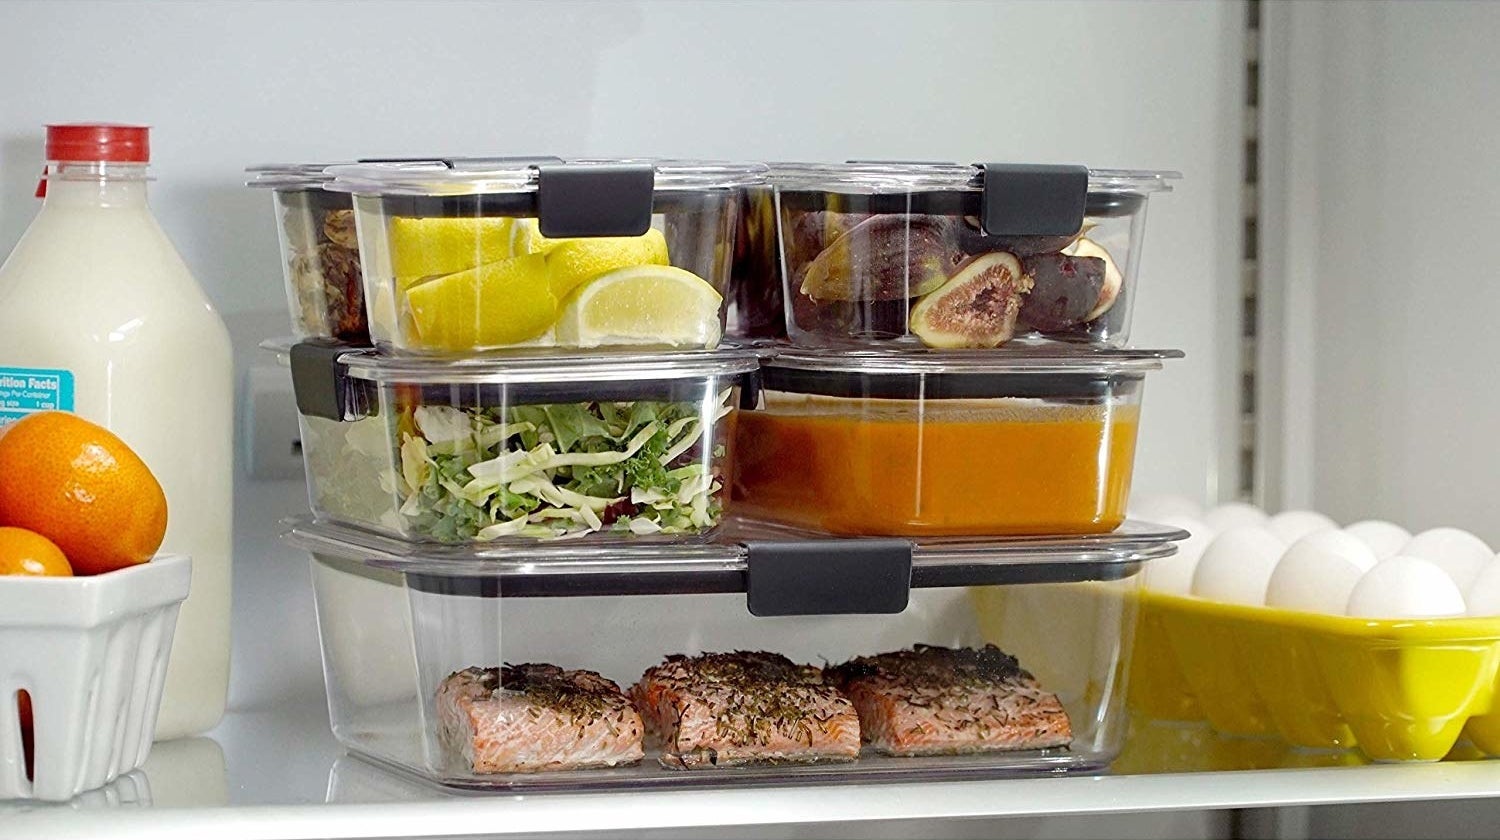 7 Storage Containers that Make Organizing Your Fridge Easy